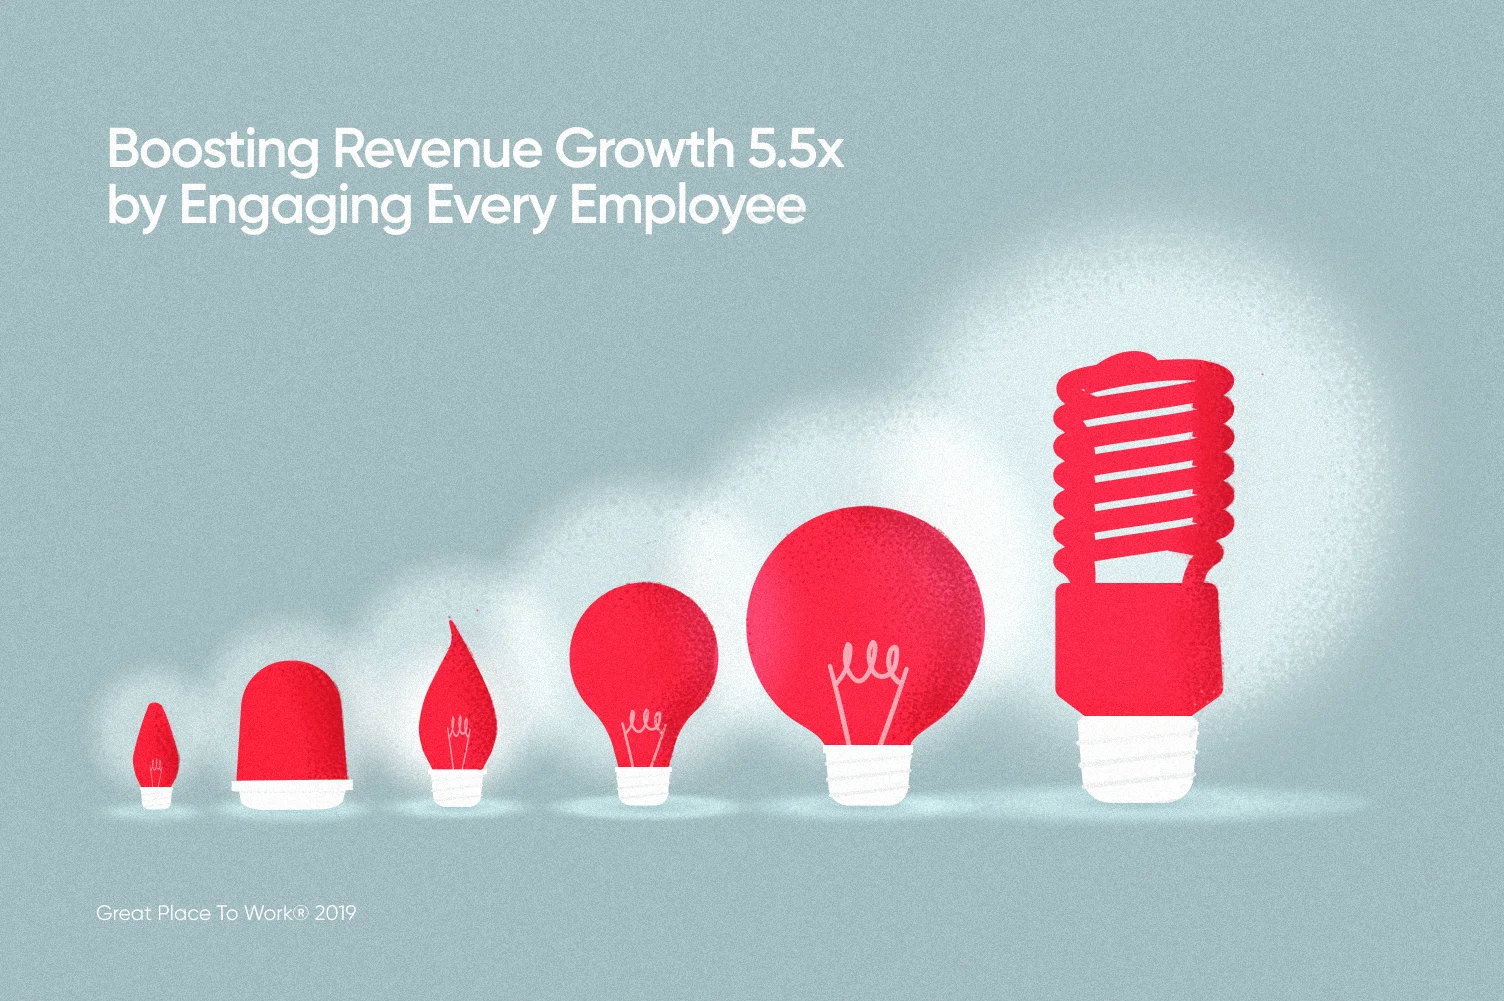 Lightbulbs getting larger in size symbolize how Inclusive innovation drives revenue growth 5.5 times